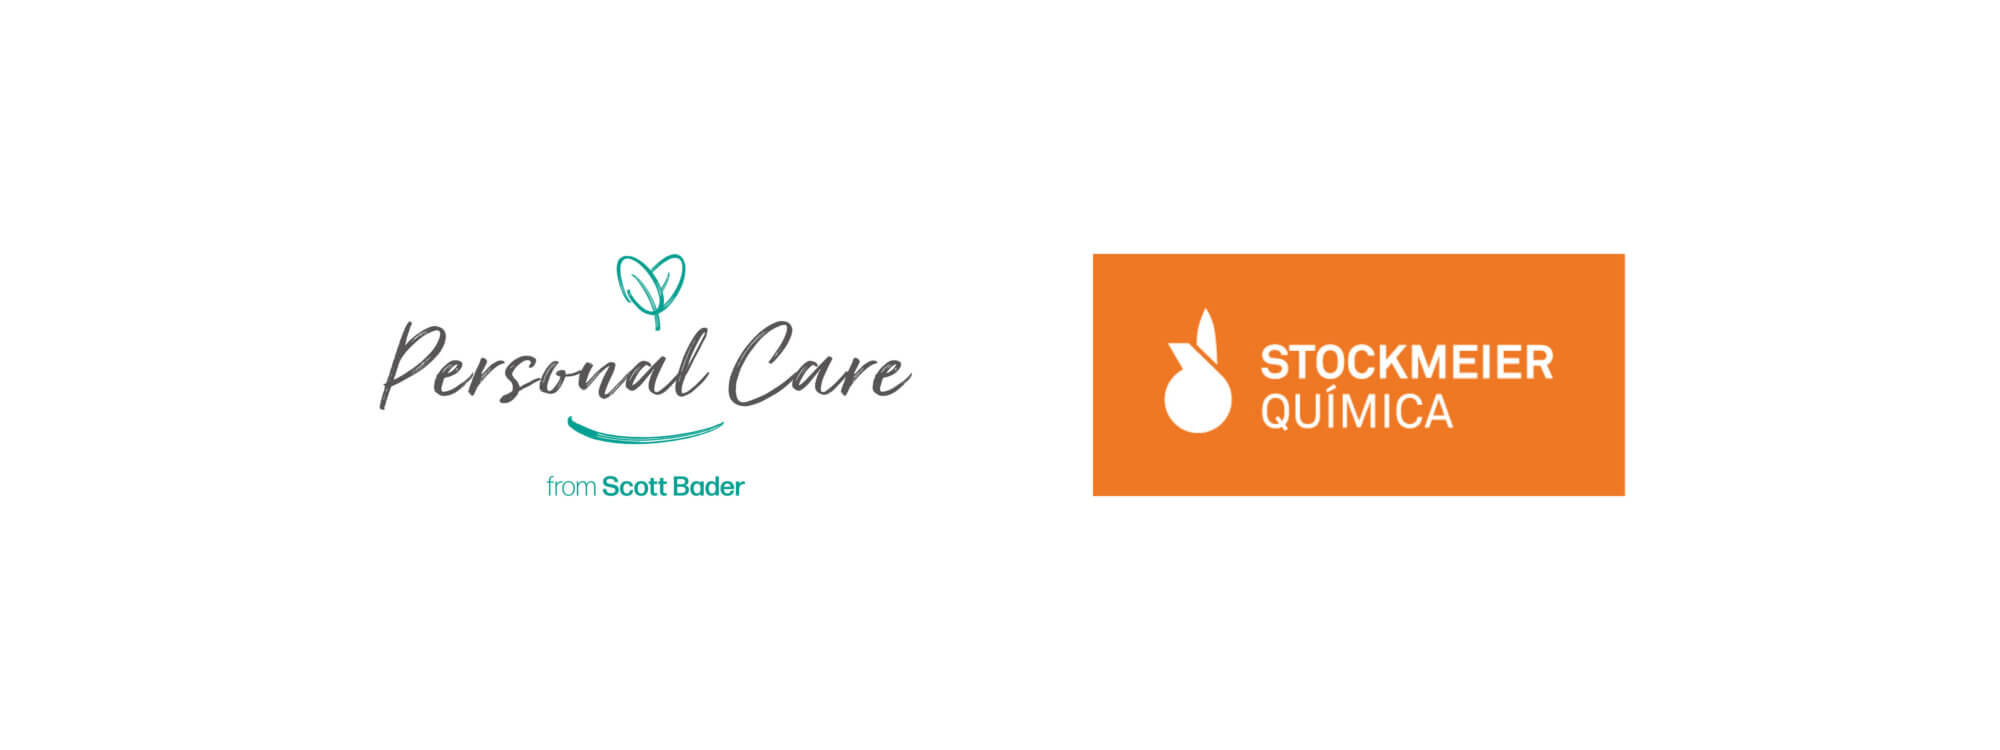 Scott Bader announce distribution partnership with STOCKMEIER Química for its Texique bio-based additives